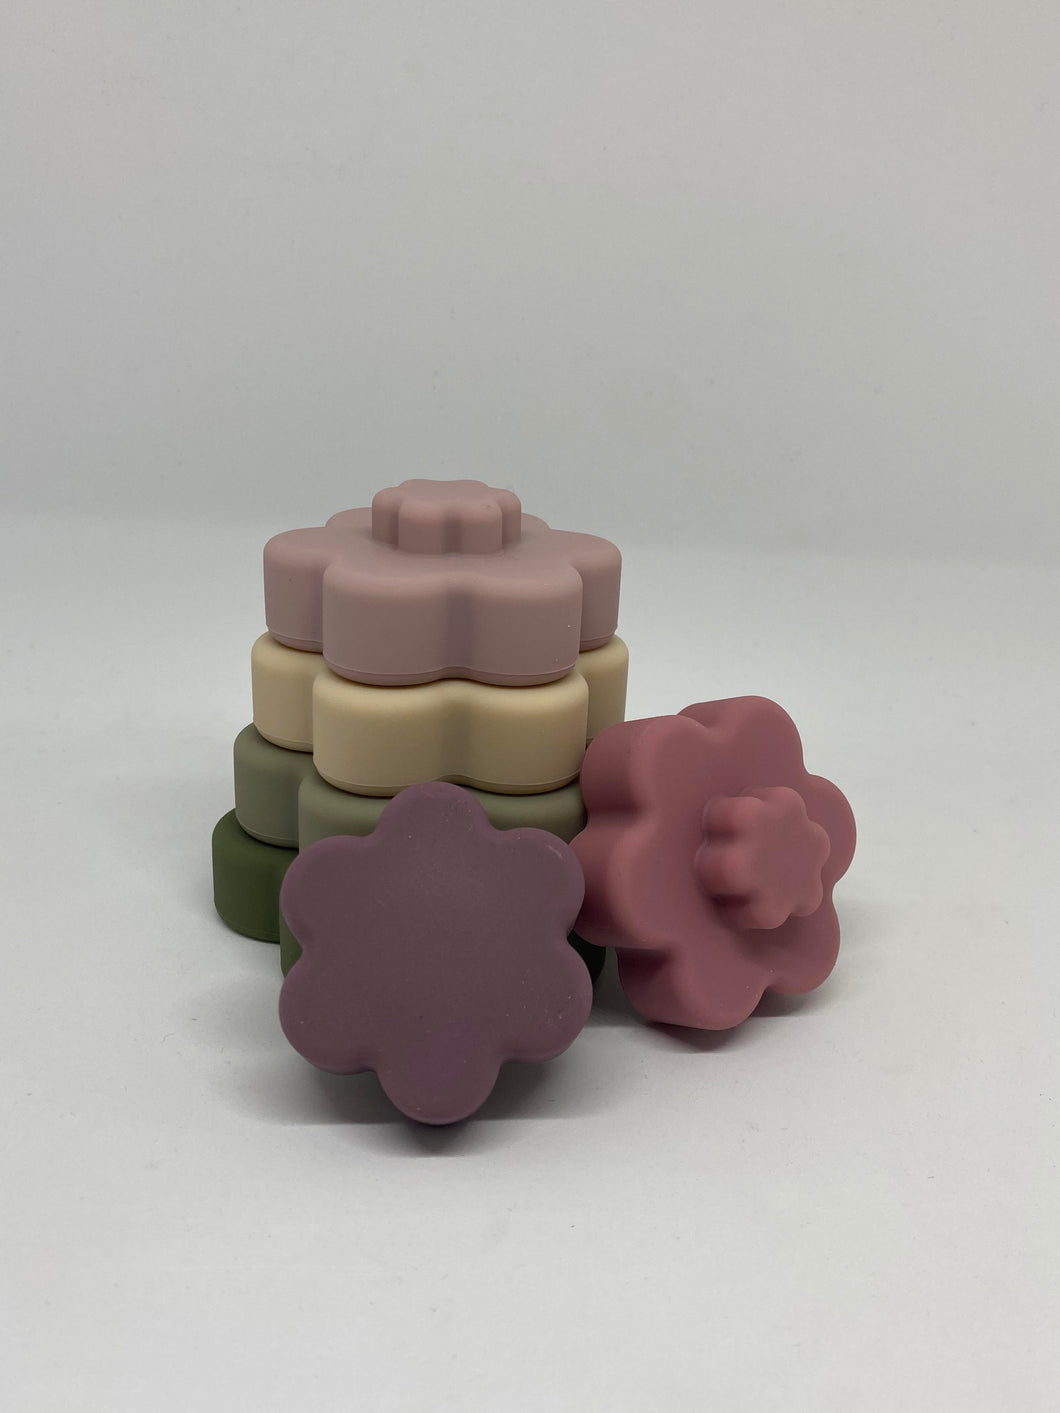 Silicone Stackable Flower